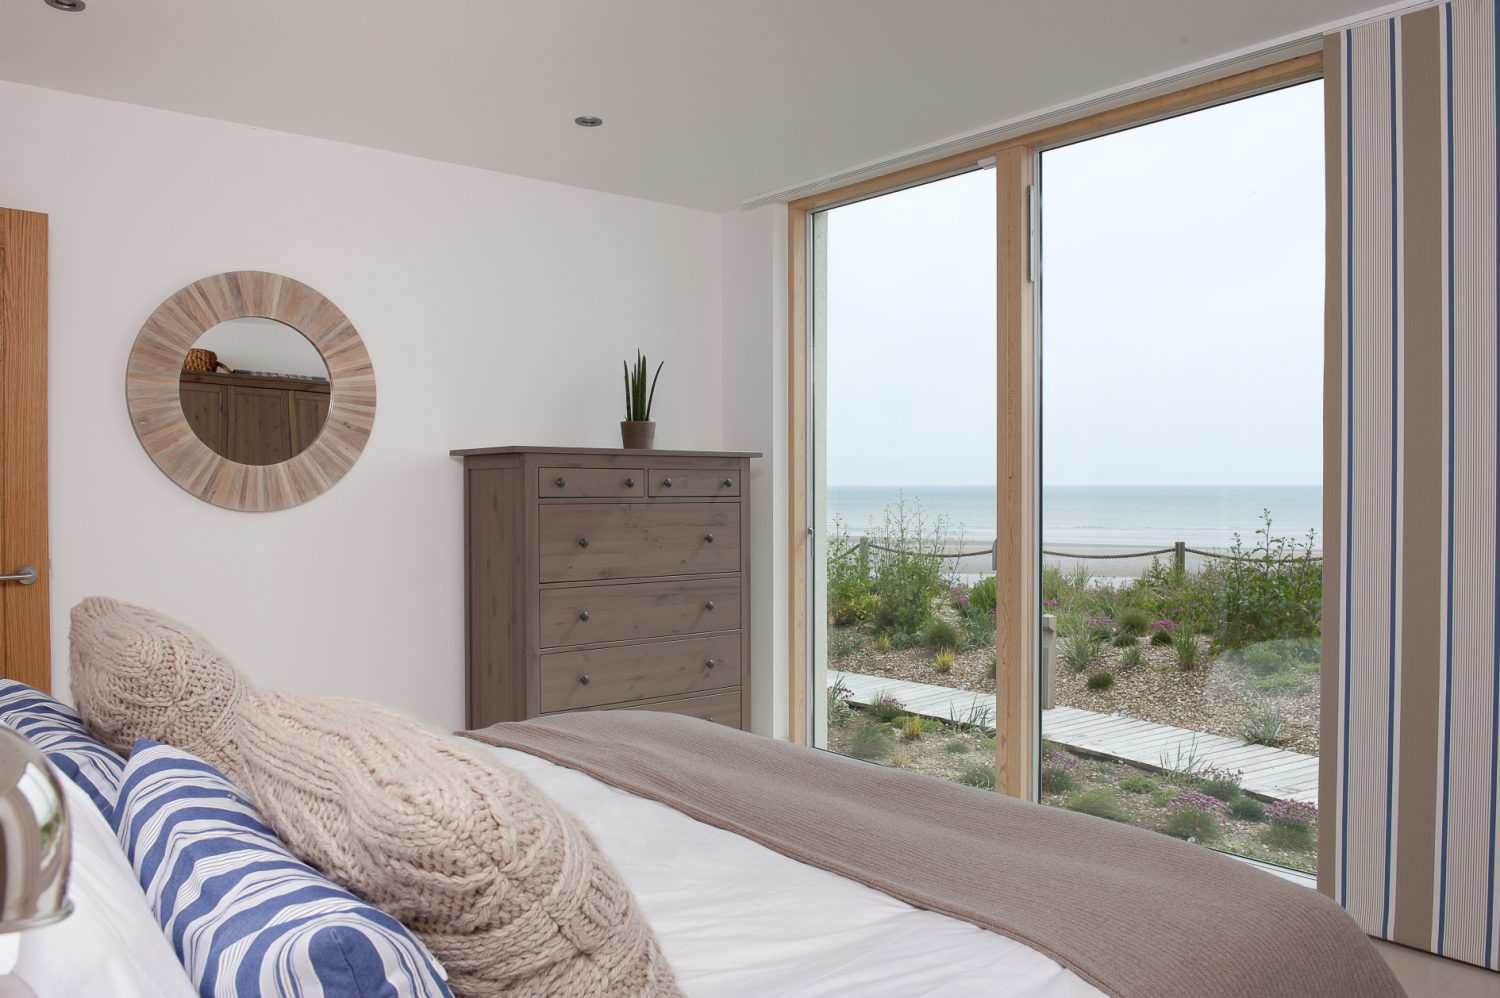 In the other wing another guest bedroom, facing the sea, is decorated in softer shades of taupe, ecru and slate blue